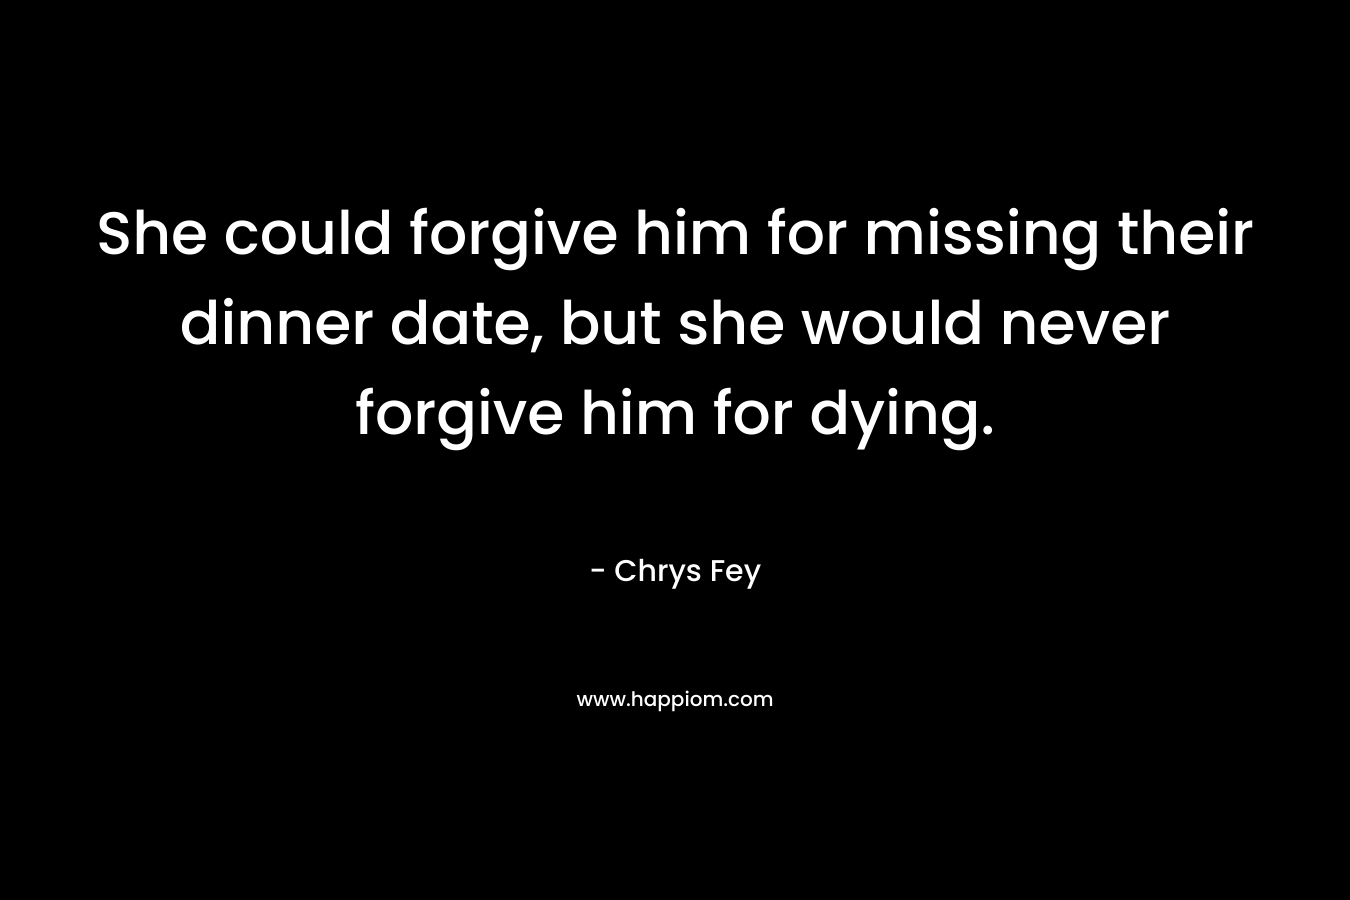 She could forgive him for missing their dinner date, but she would never forgive him for dying.